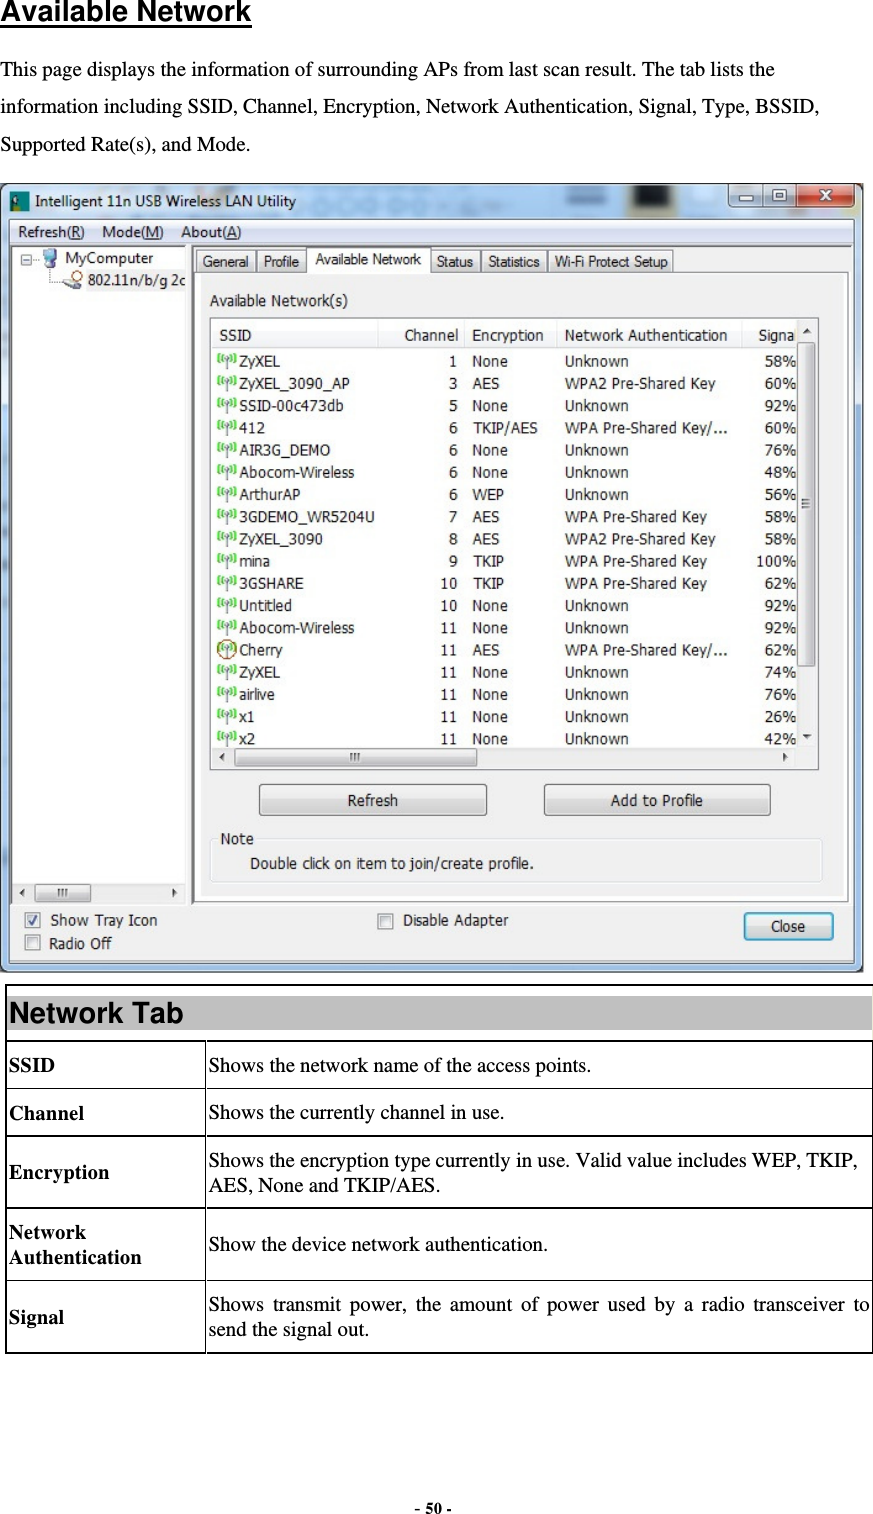  - 50 -  Available Network This page displays the information of surrounding APs from last scan result. The tab lists the information including SSID, Channel, Encryption, Network Authentication, Signal, Type, BSSID, Supported Rate(s), and Mode.  Network Tab SSID  Shows the network name of the access points. Channel  Shows the currently channel in use. Encryption  Shows the encryption type currently in use. Valid value includes WEP, TKIP, AES, None and TKIP/AES. Network Authentication  Show the device network authentication. Signal  Shows transmit power, the amount of power used by a radio transceiver to send the signal out. 